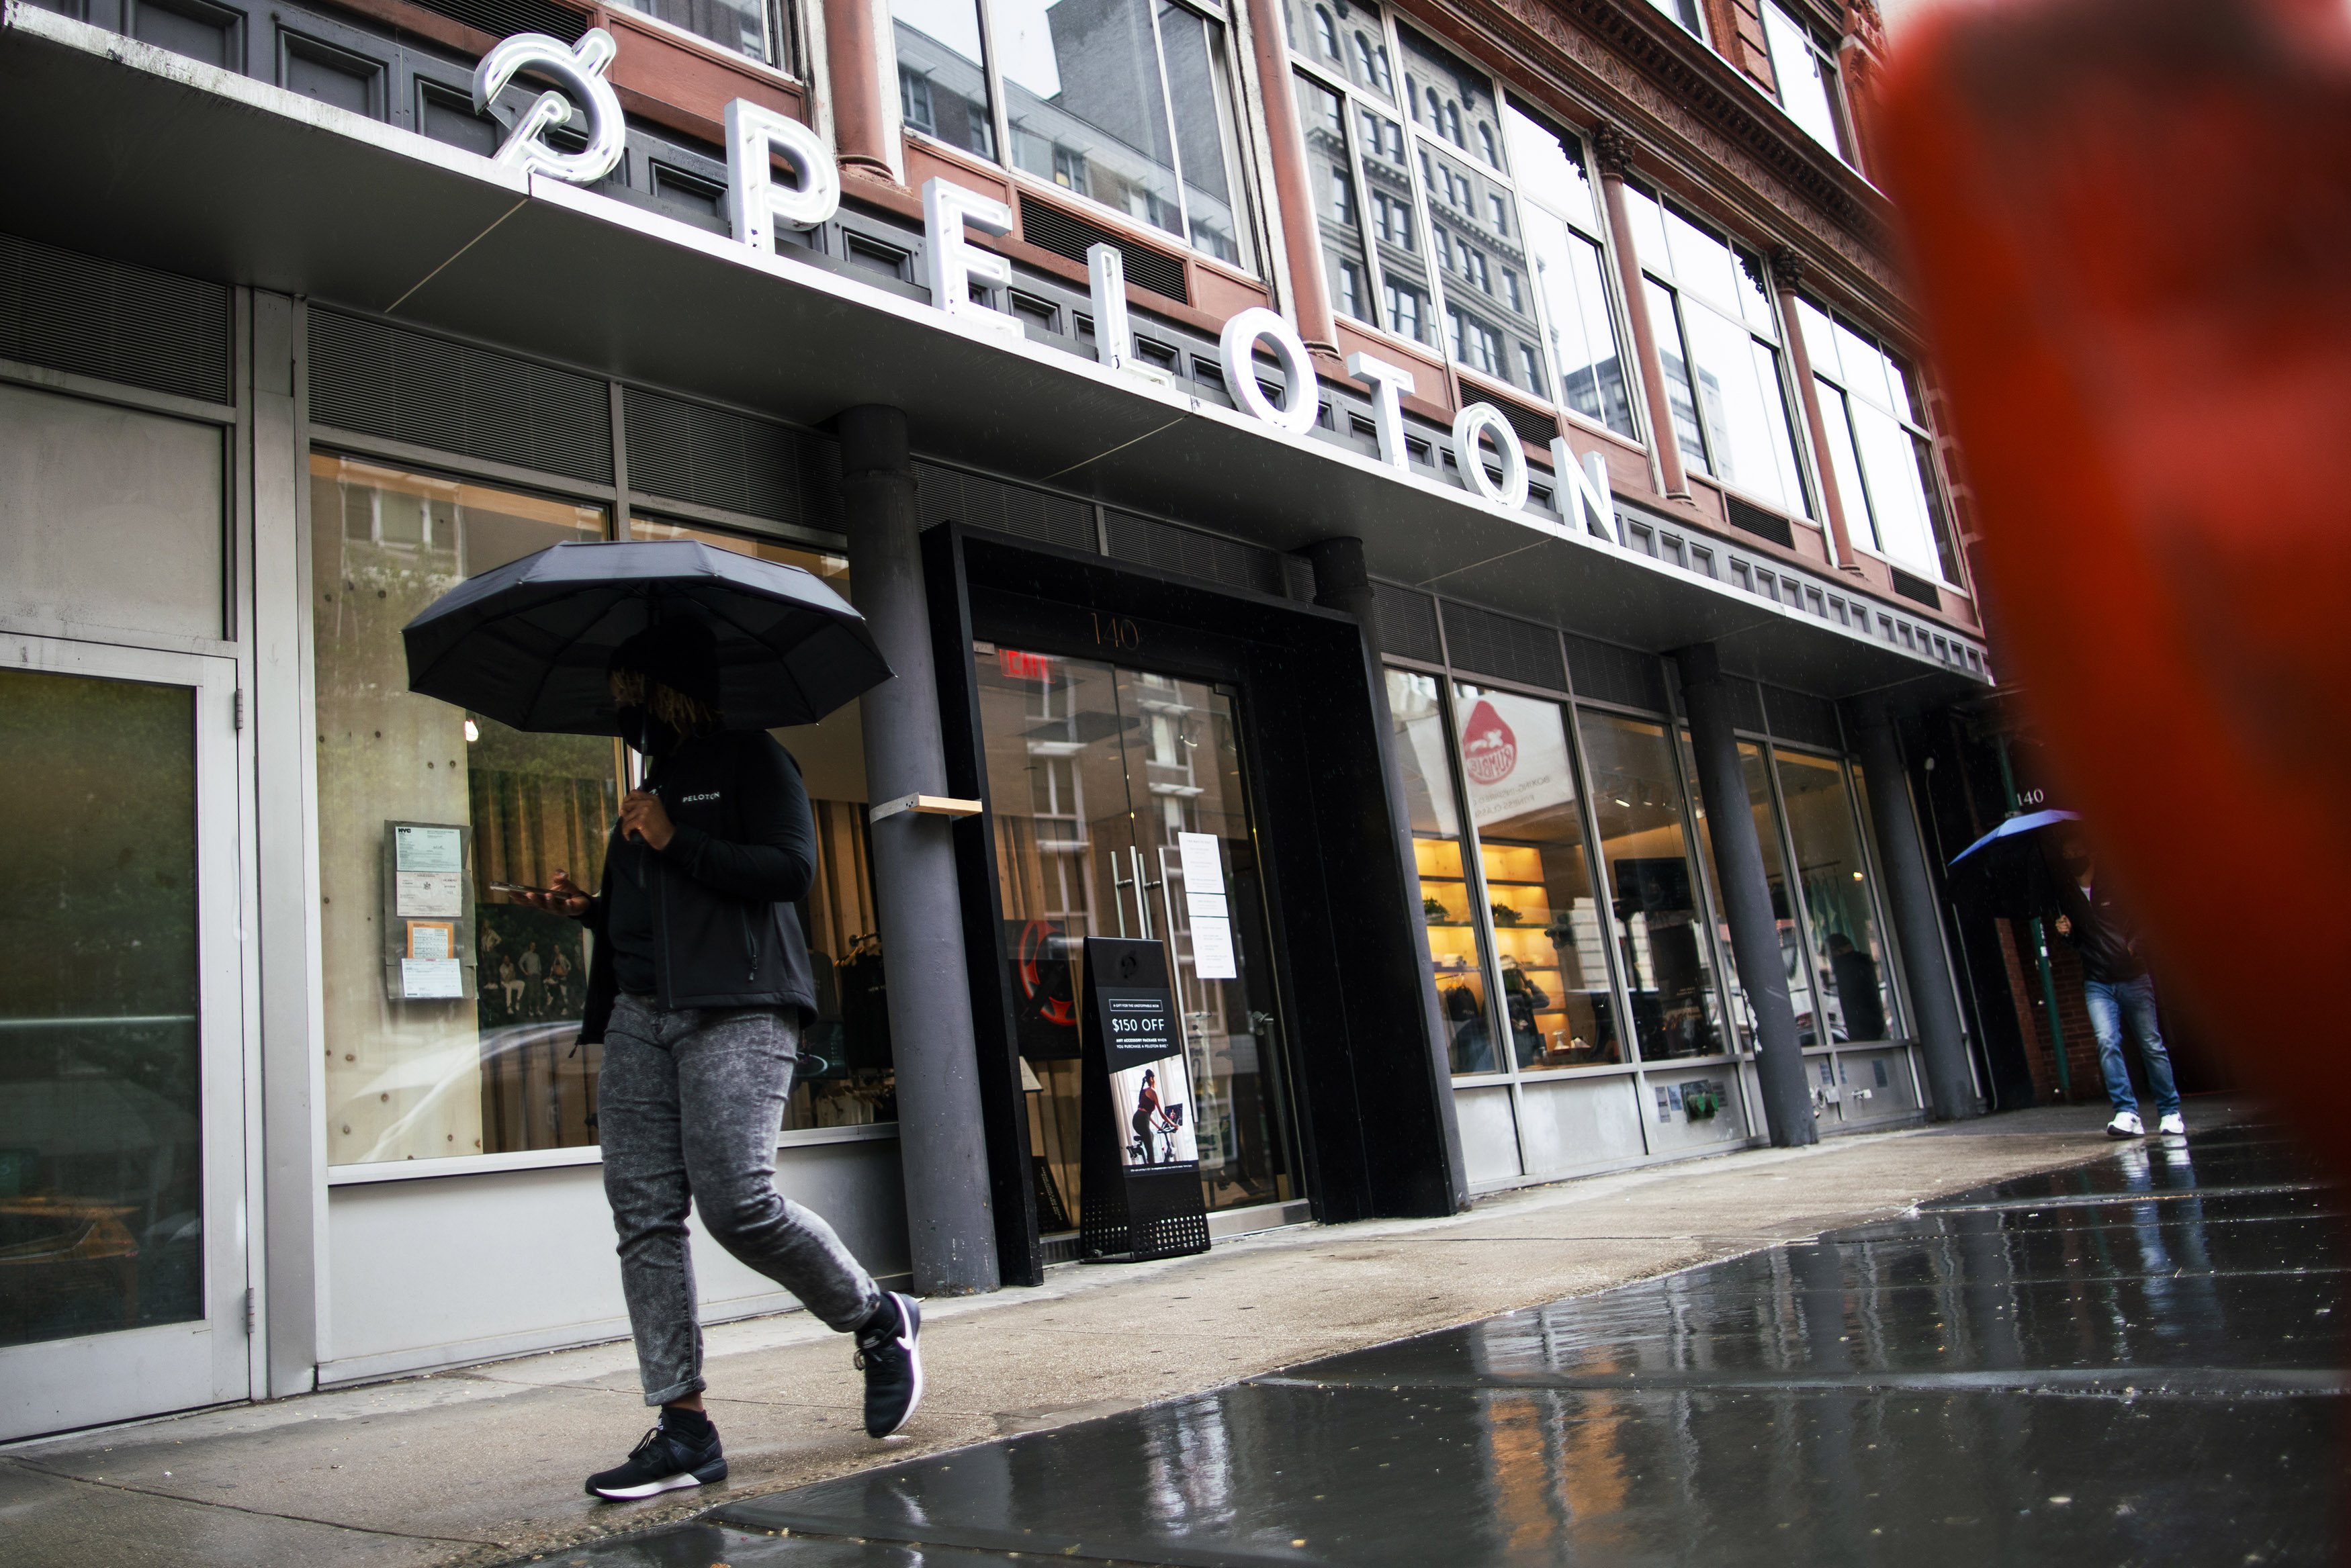 It's been gloomy days at Peloton. (VIEW press / Getty Images)